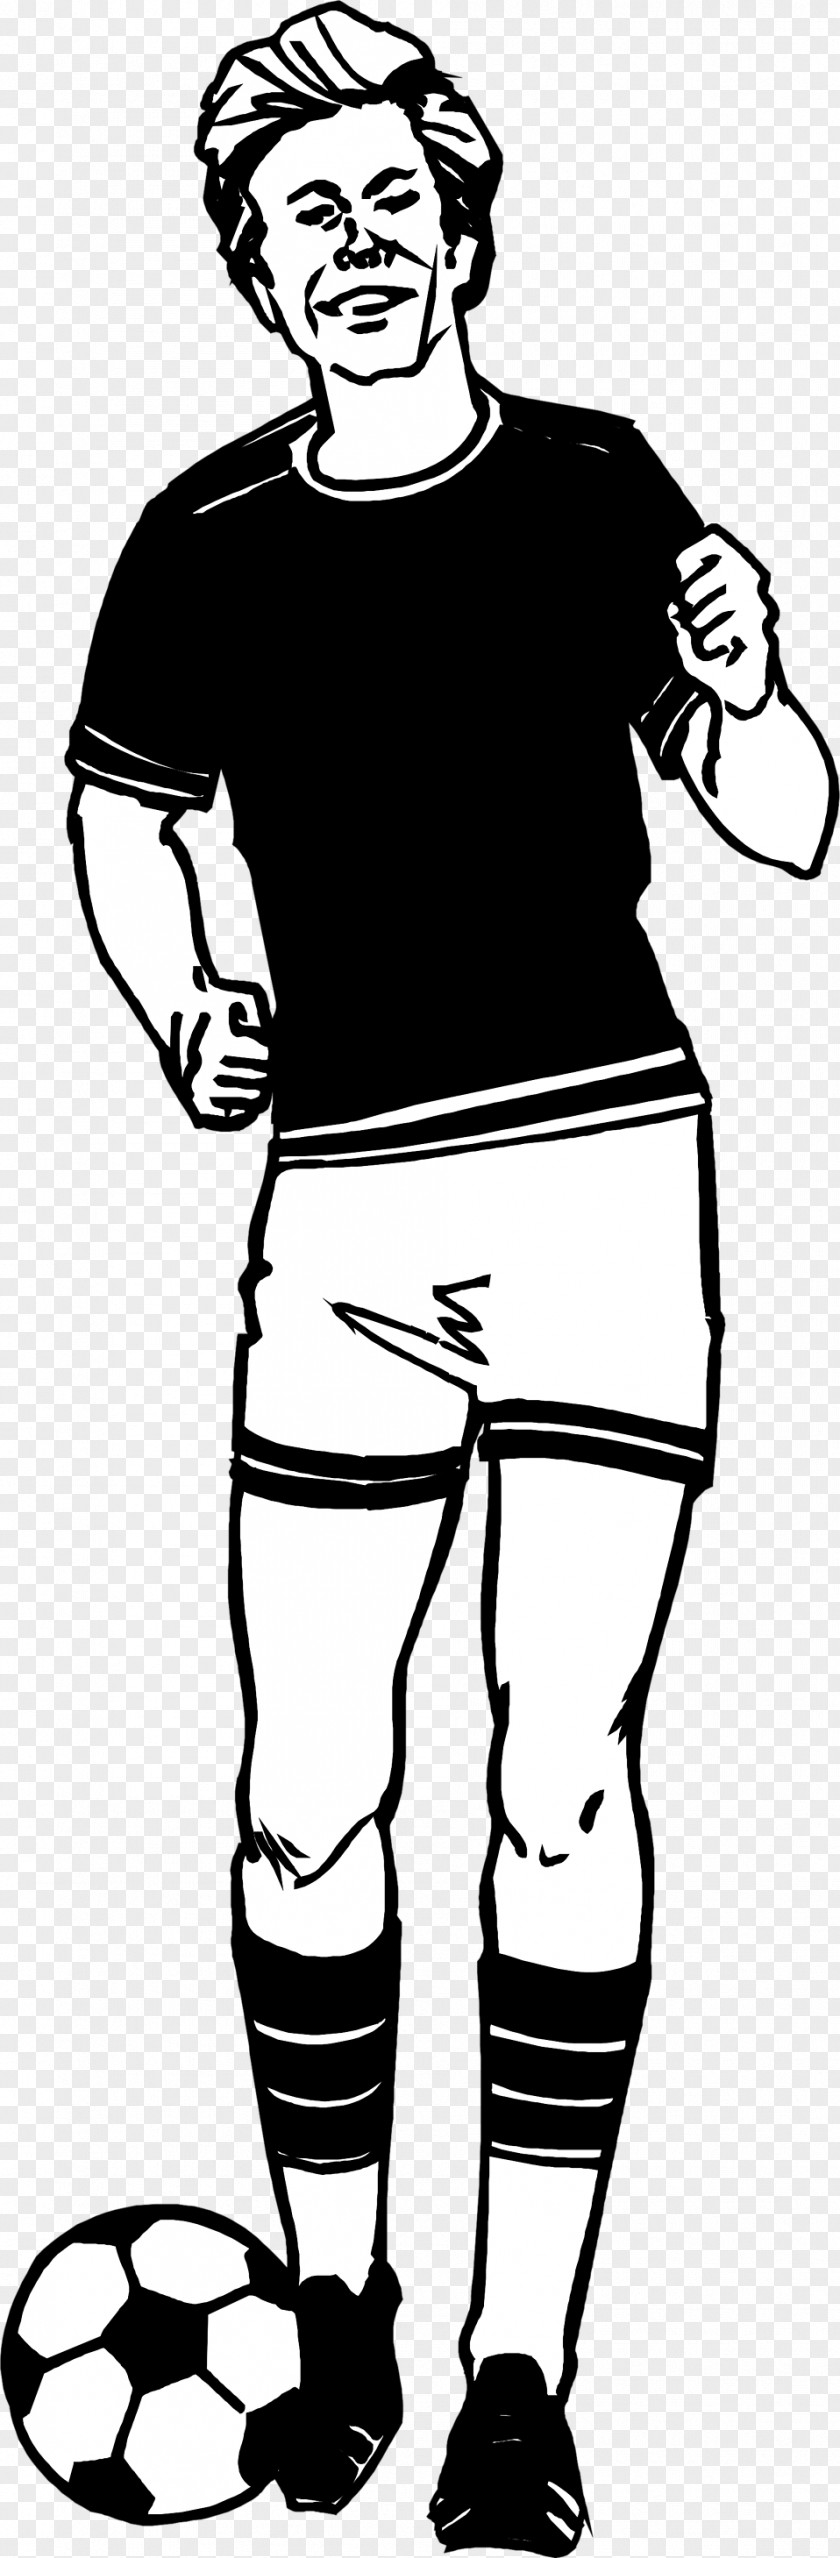 Soccer Player Illustration Animaatio Drawing Clip Art PNG